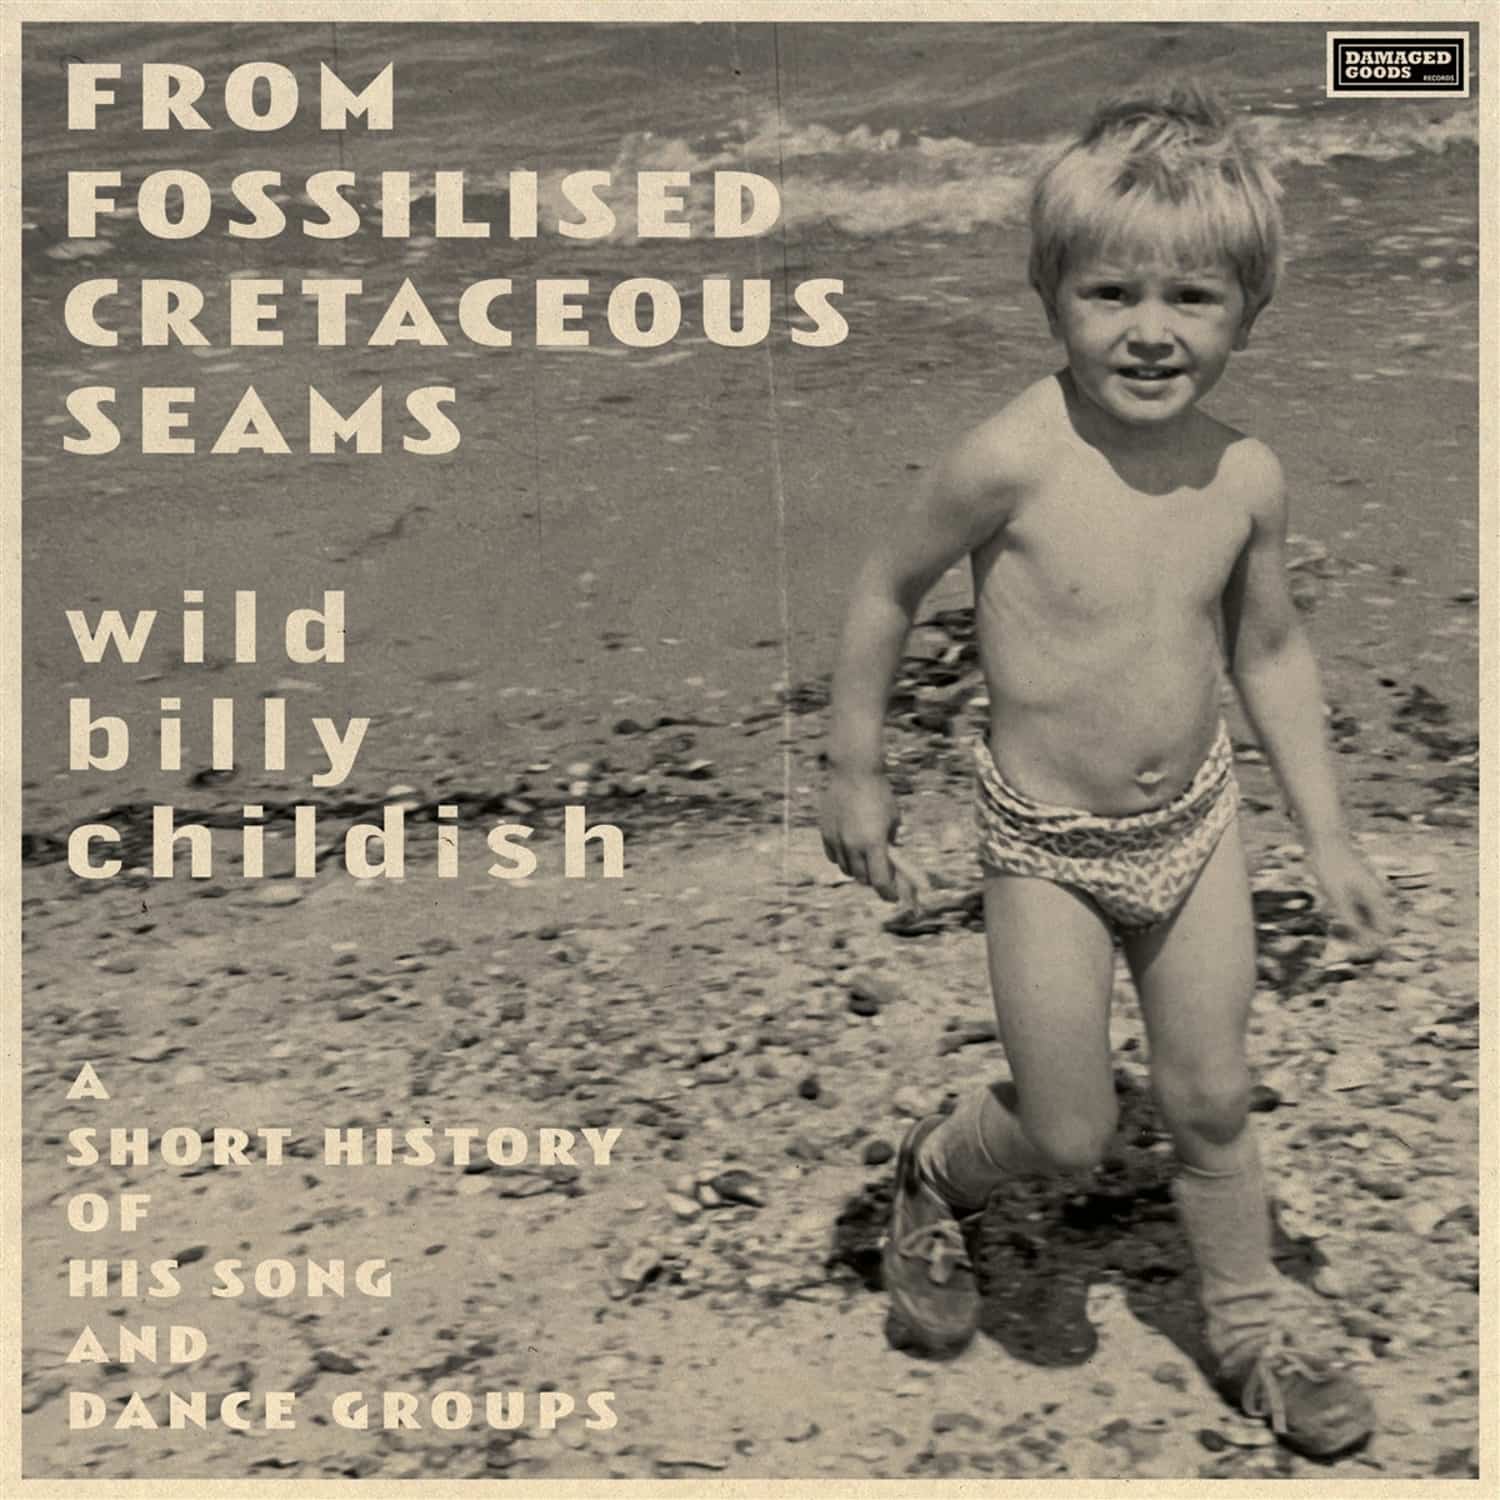 Billy Childish - FROM FOSSILISED CRETACEOUS SEAMS 